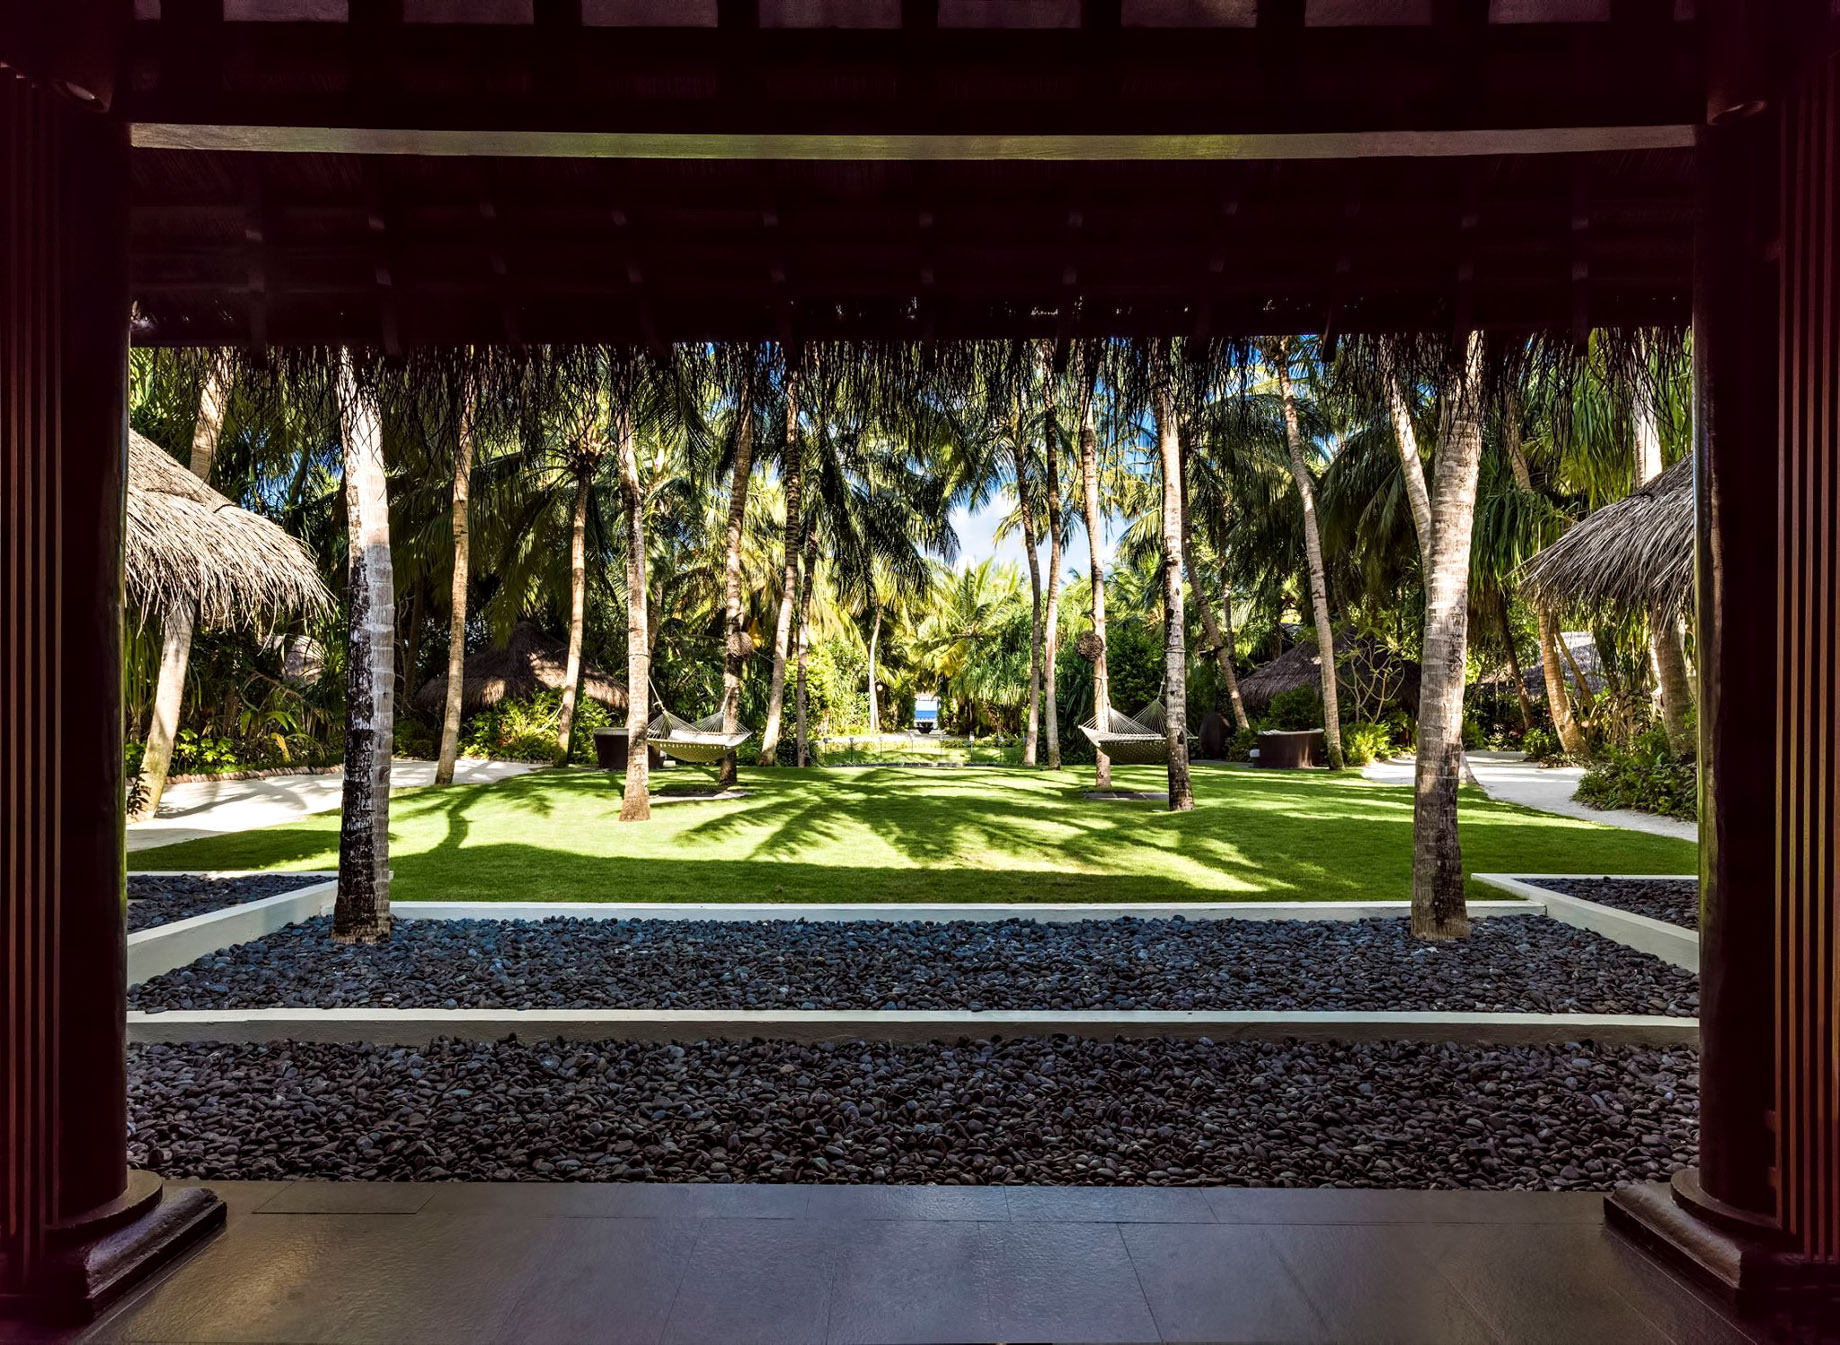 One&Only Reethi Rah Resort - North Male Atoll, Maldives - Spa Building Lawn View